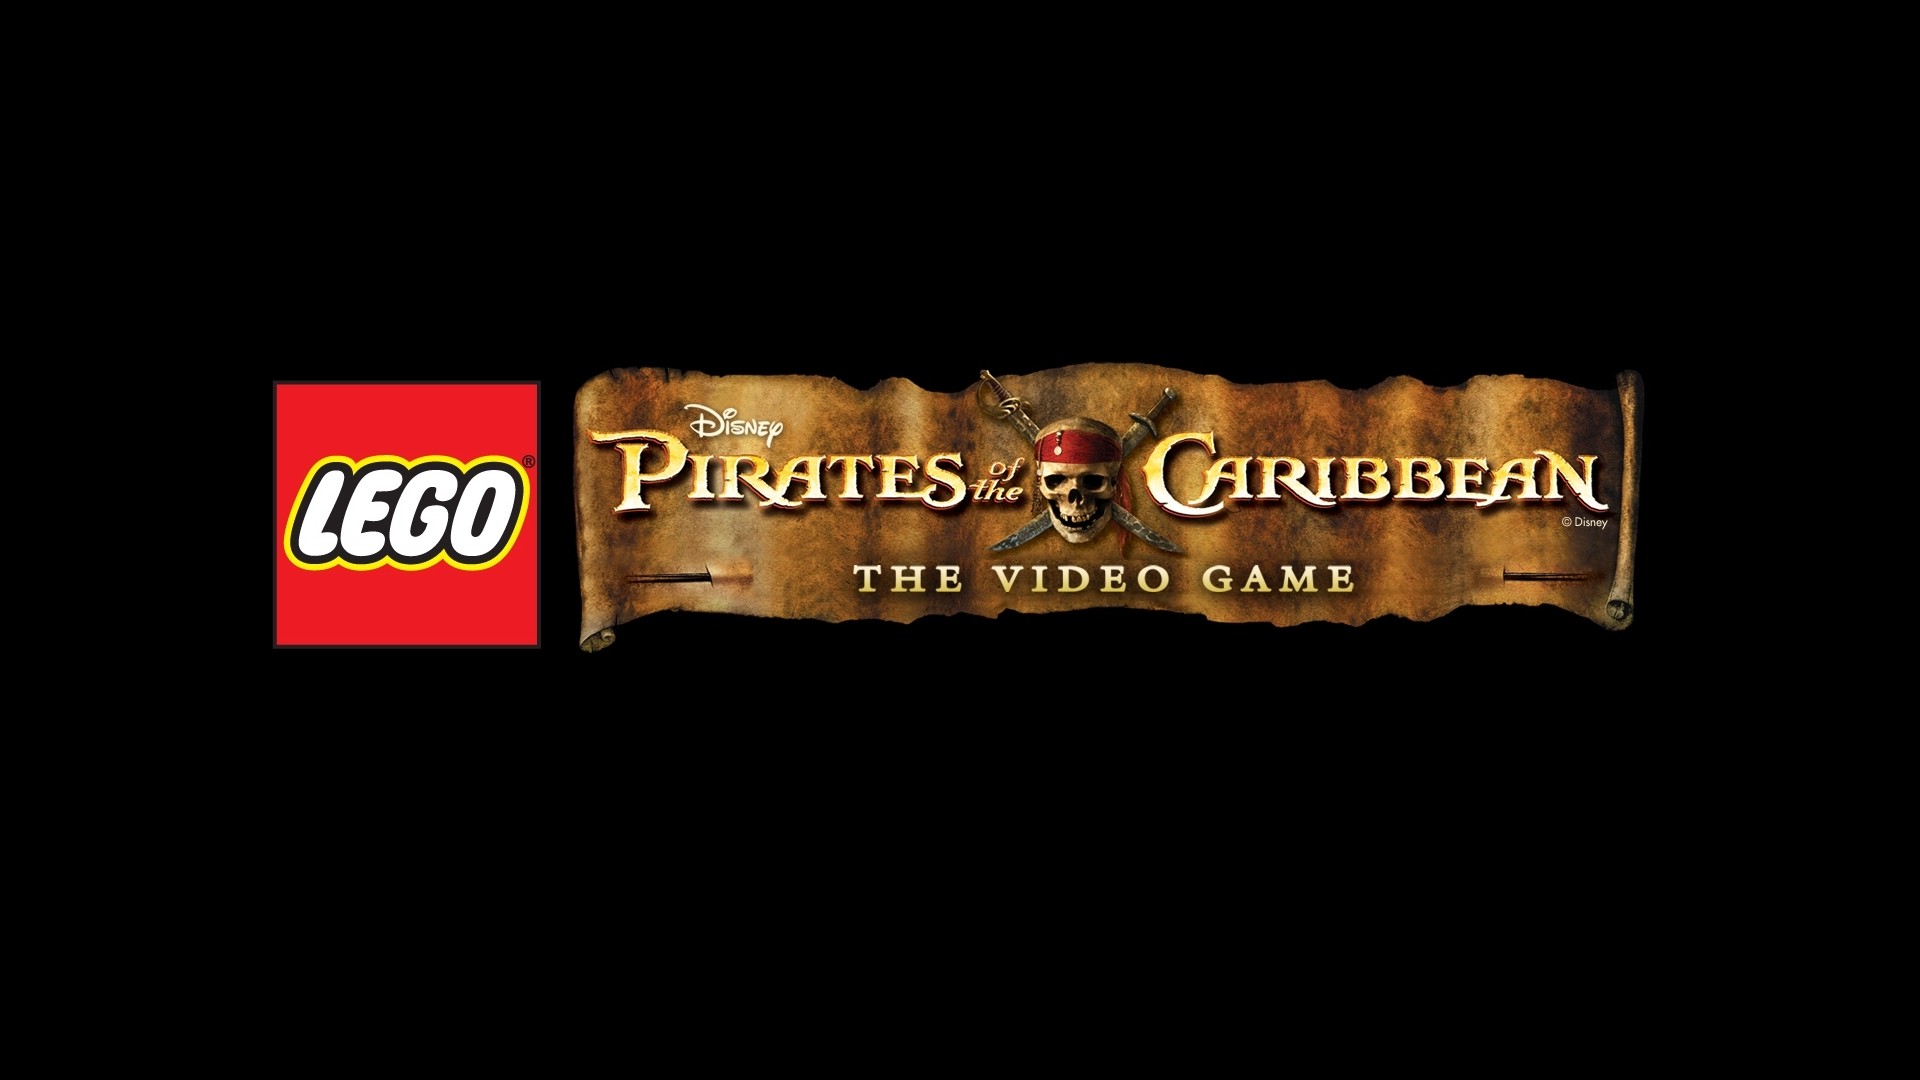 video game, lego pirates of the caribbean: the video game, pirates of the caribbean